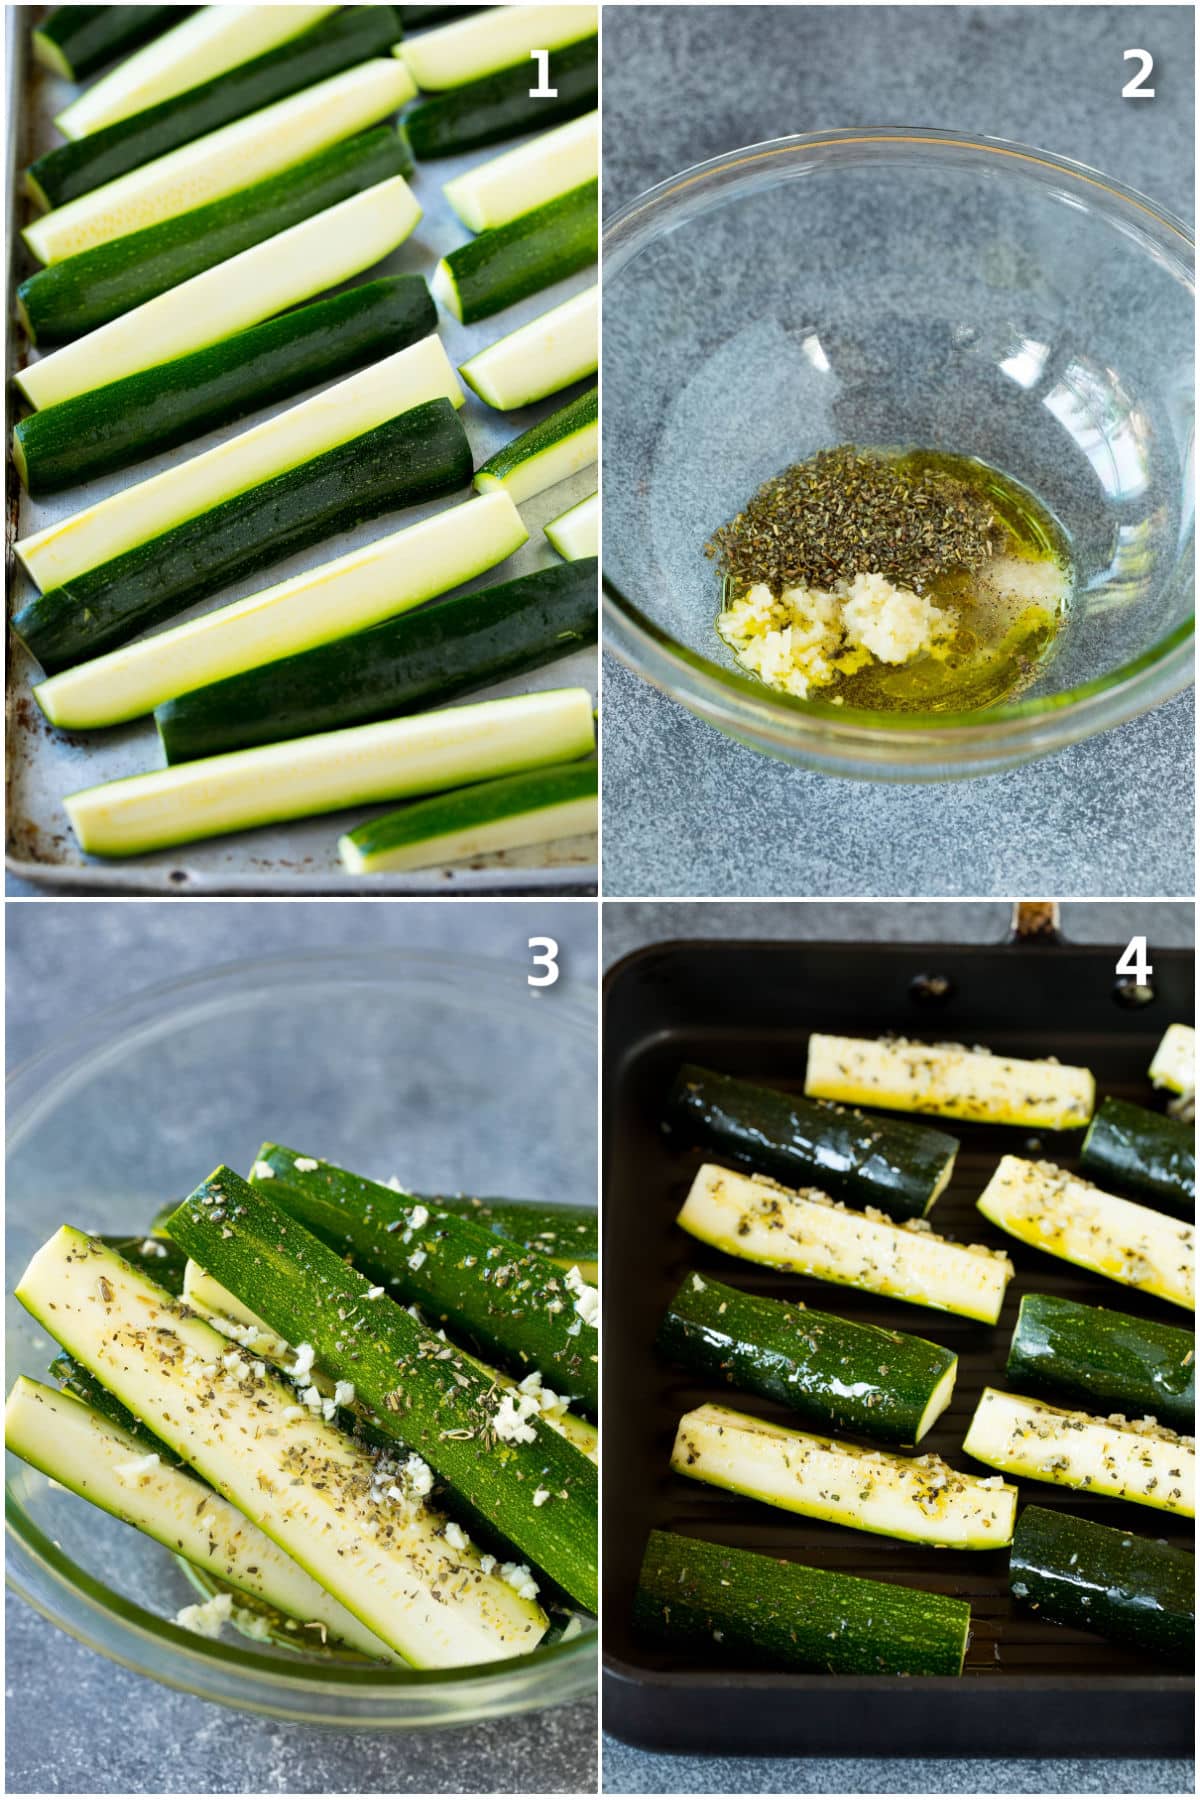 Step by step shots showing how to grill zucchini.